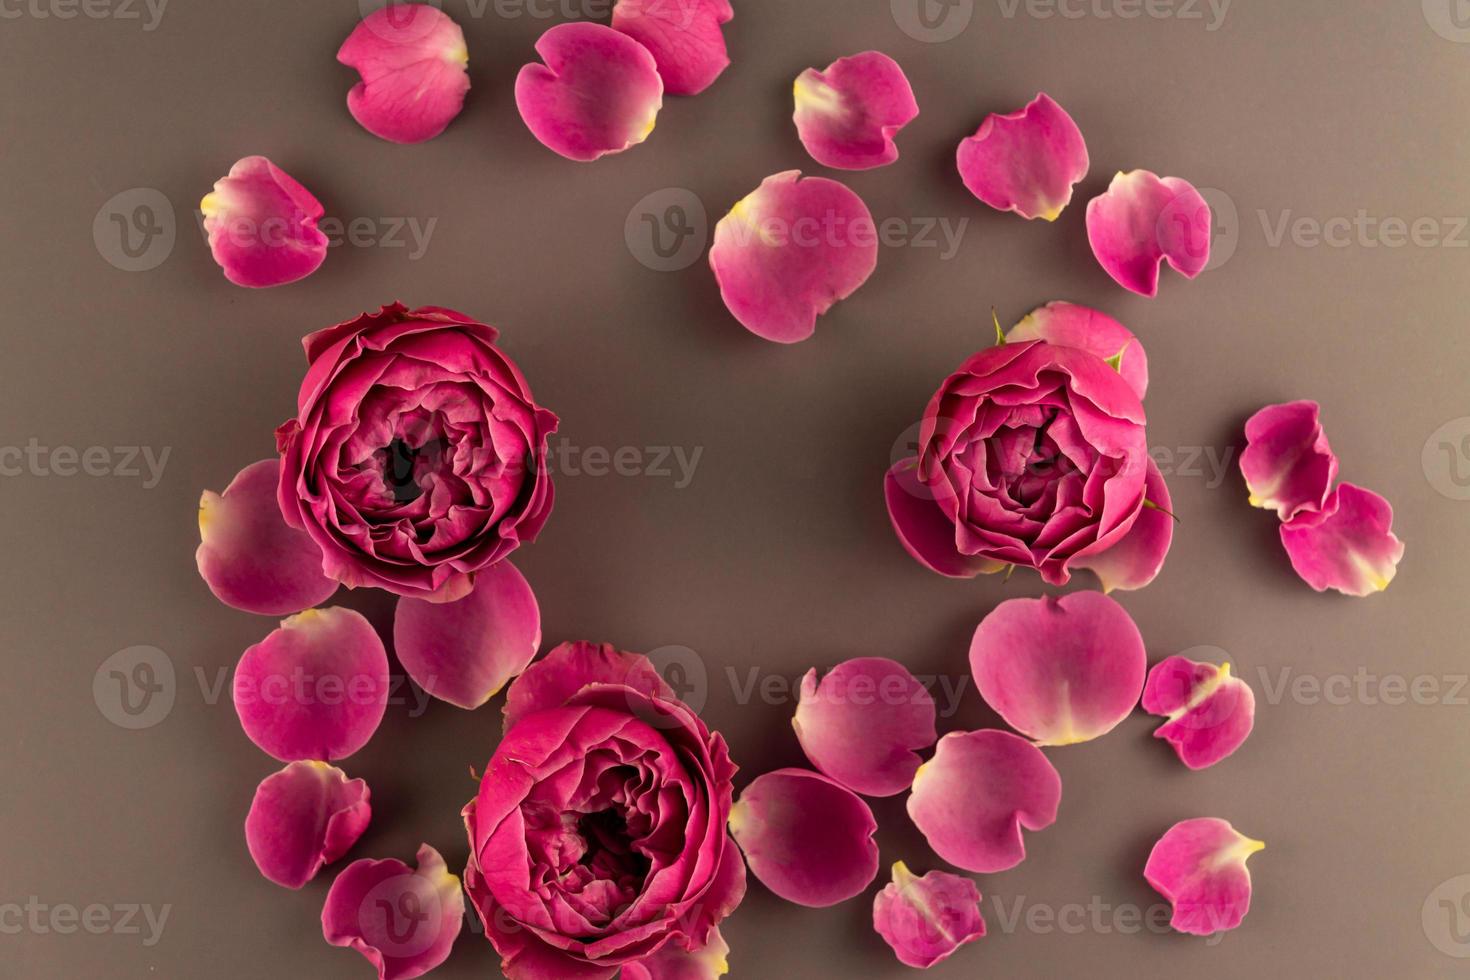 Top view of blooming rose flover on brown background. Festive greeting card, flower arrangement. Top view photo